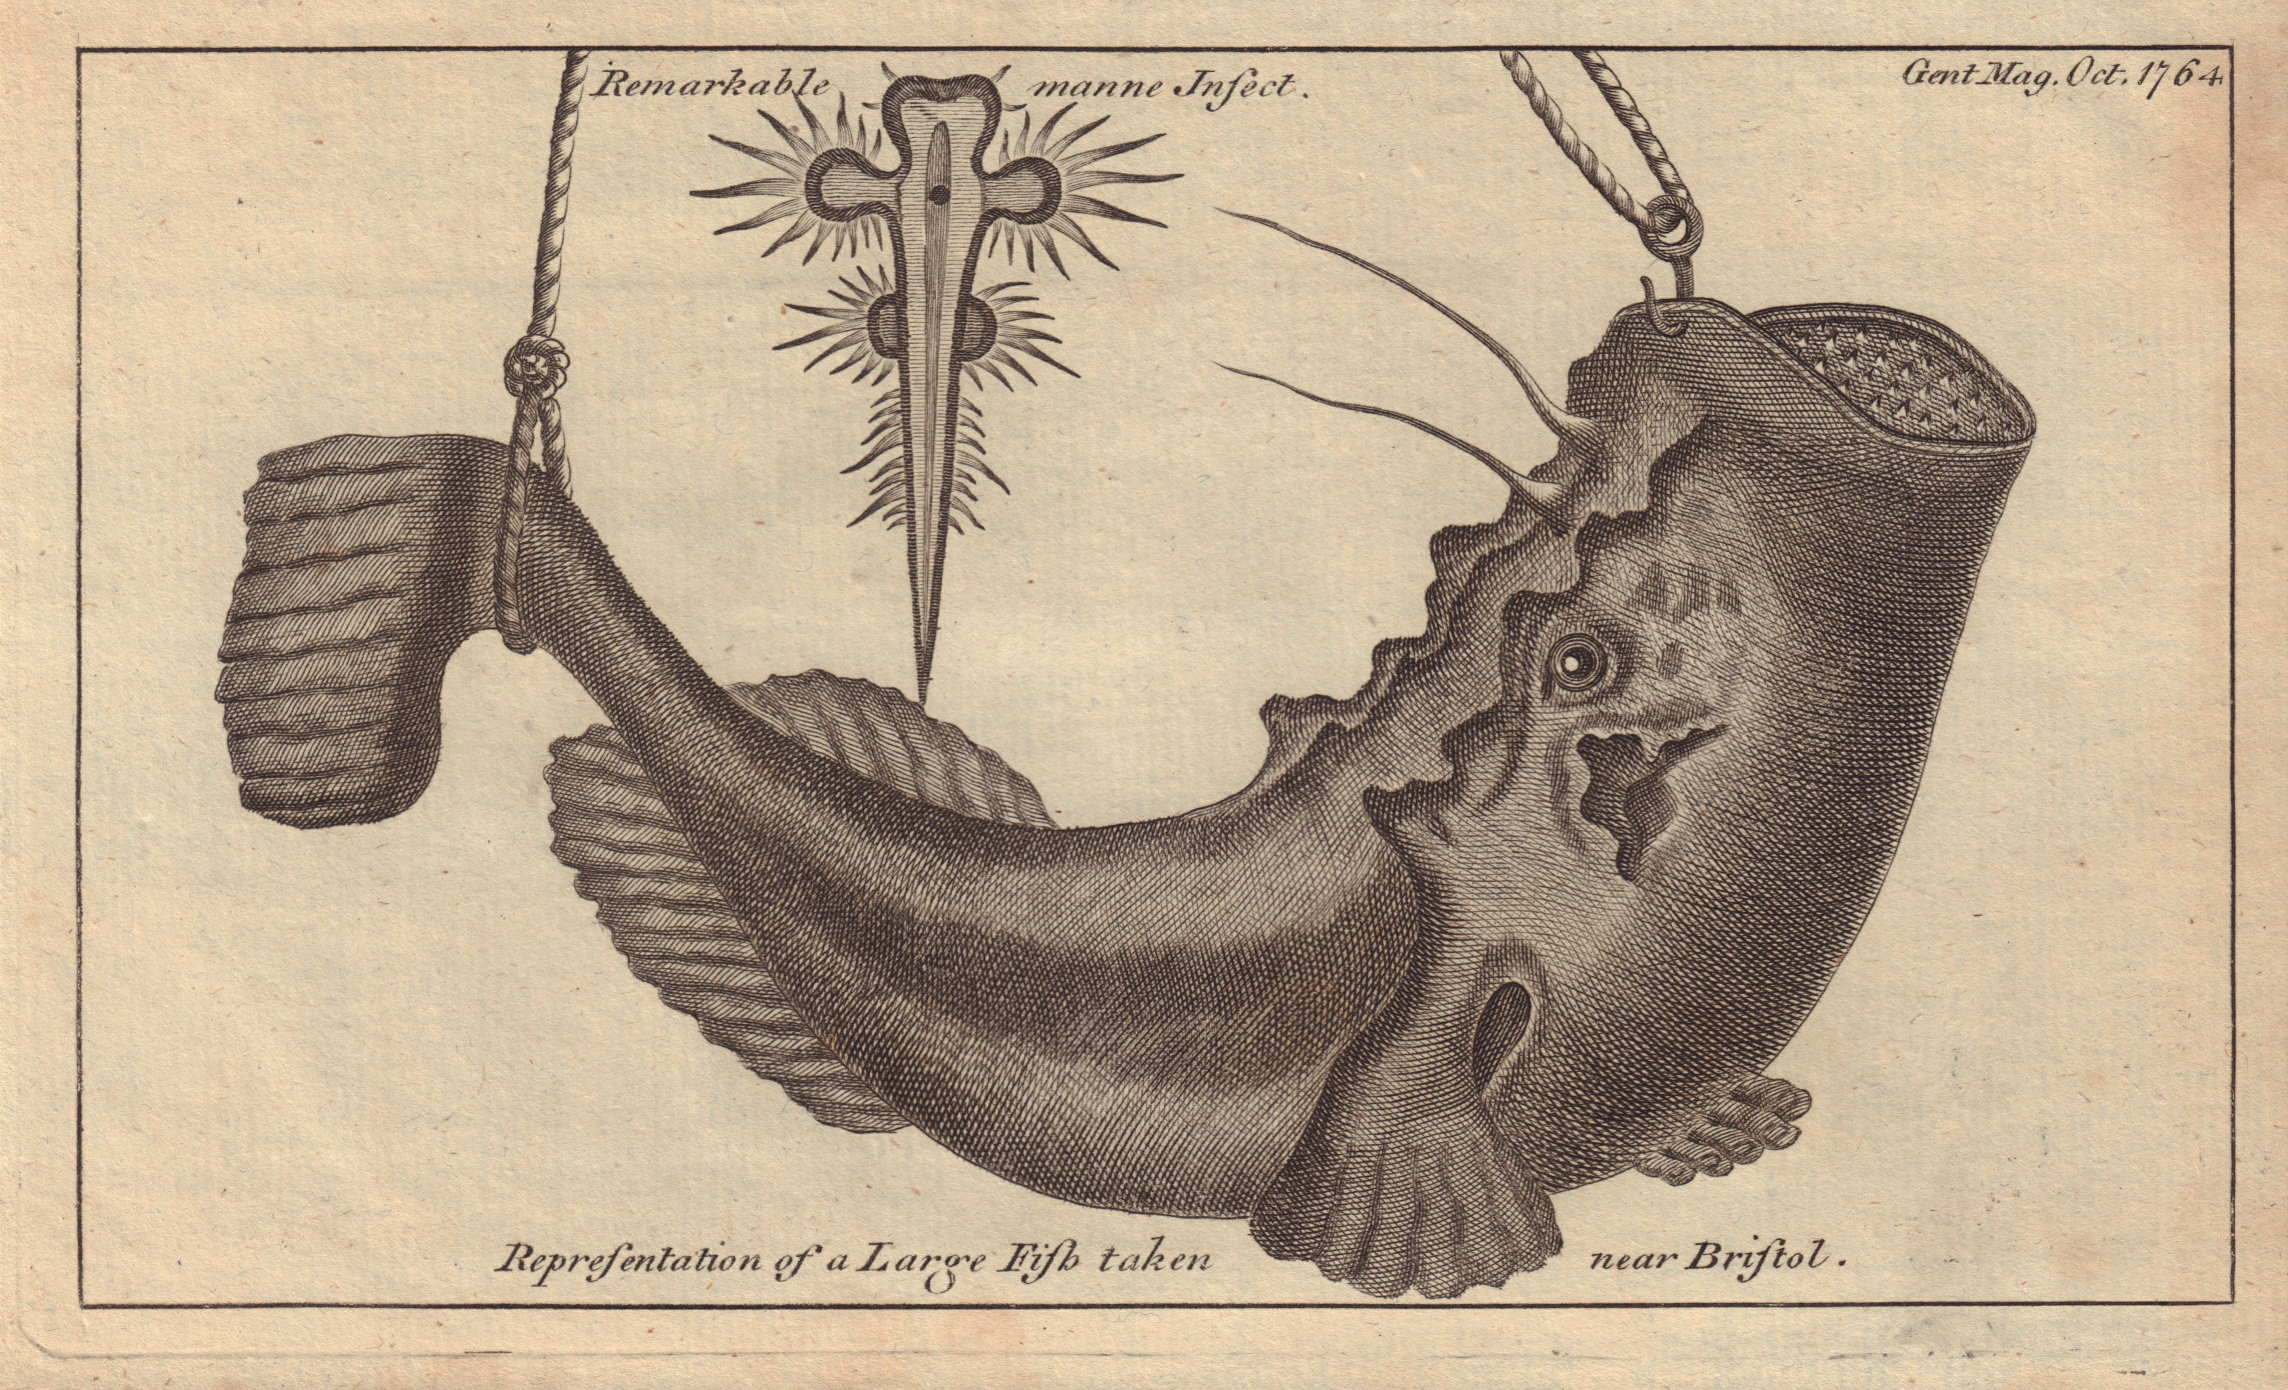 A Large Fish taken near Bristol. Remarkable manne Insect. GENTS MAG 1764 print